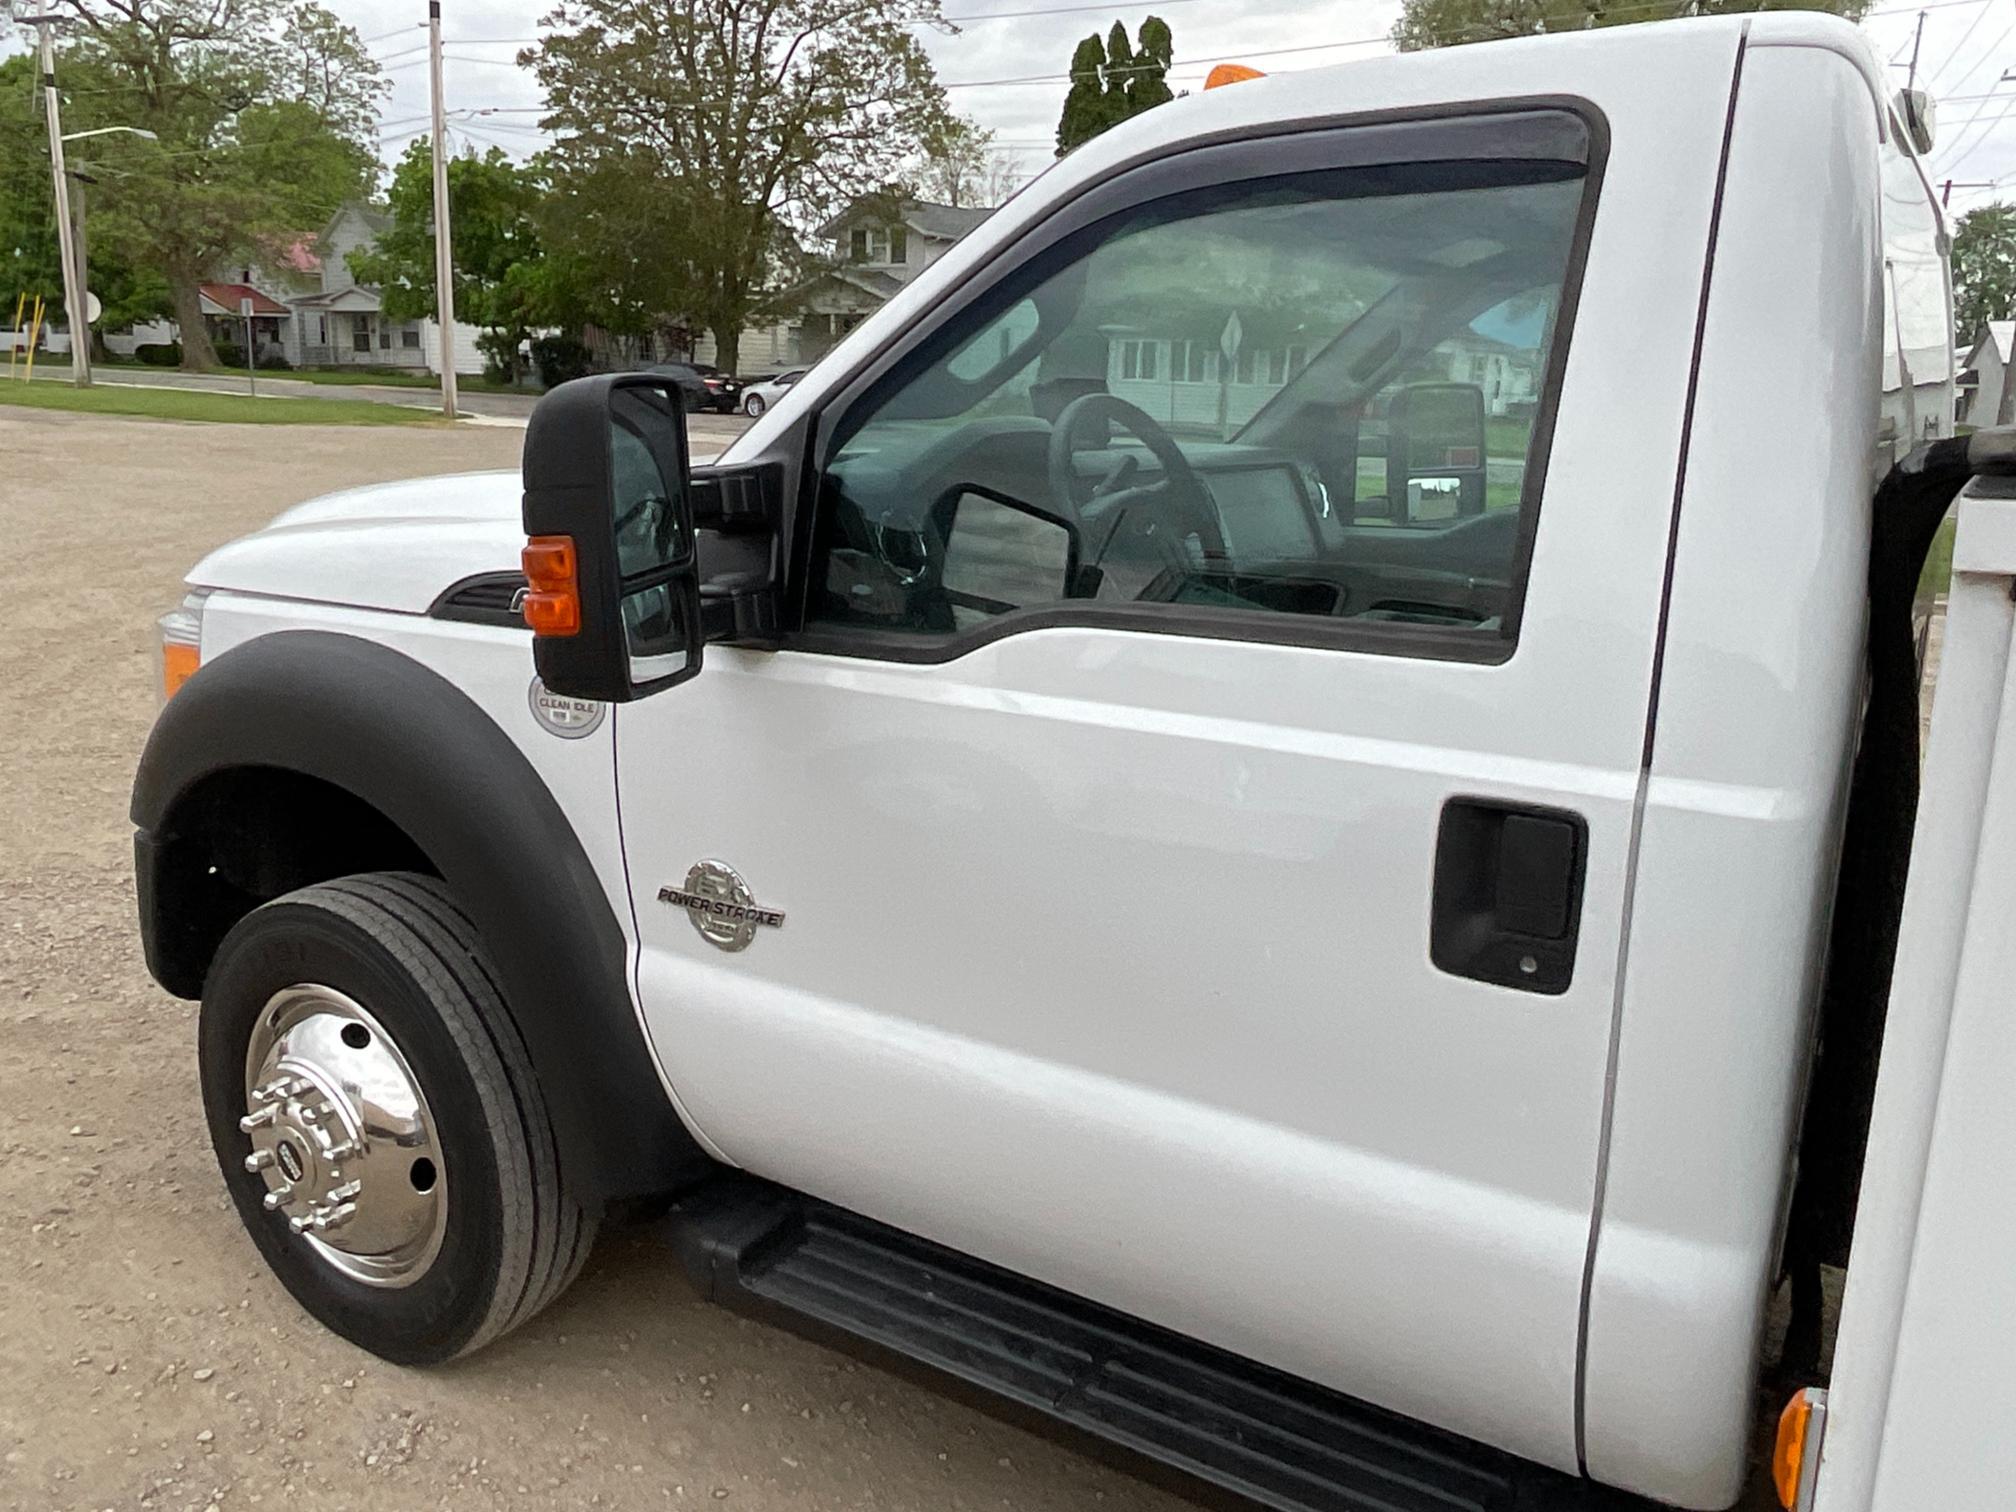 2013 Ford F550 Service Truck